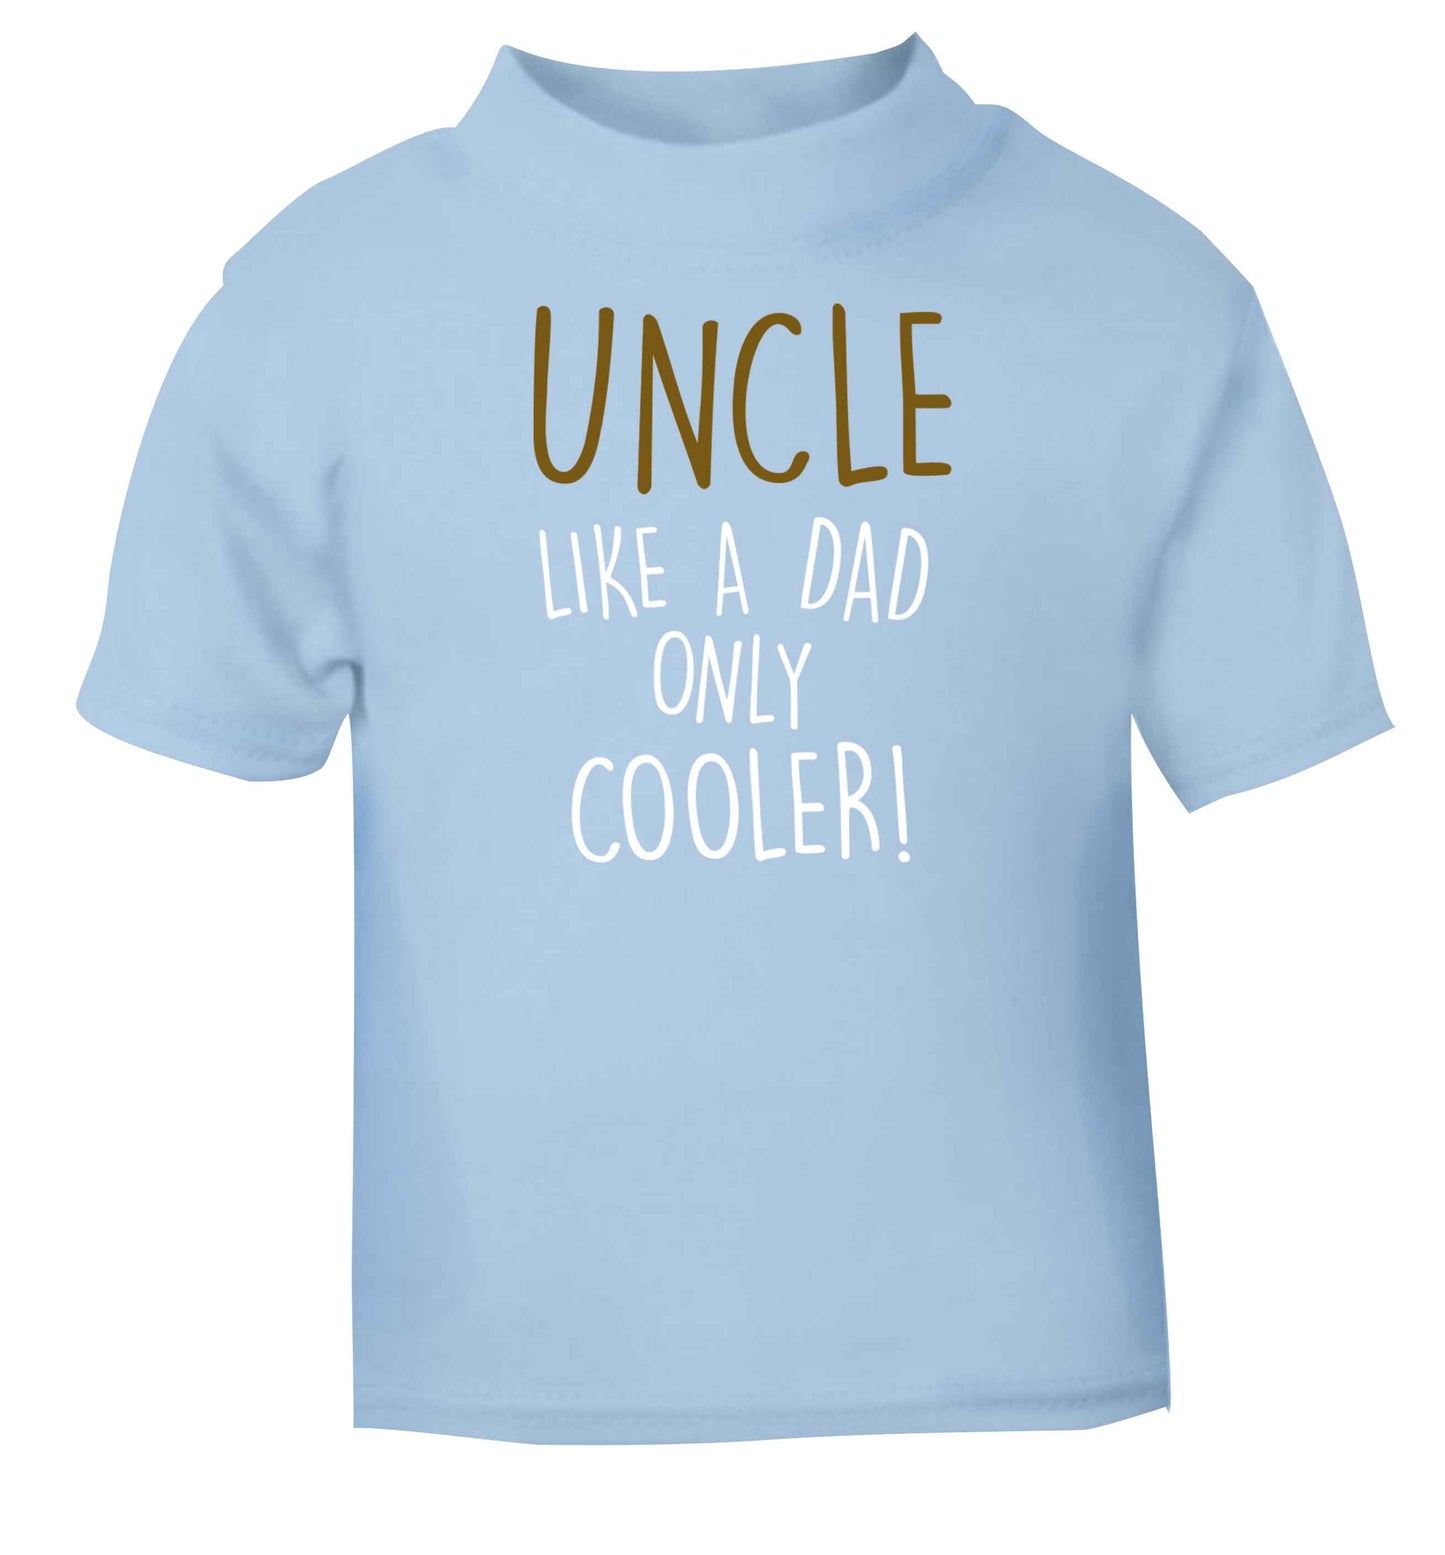 Uncle like a dad only cooler light blue baby toddler Tshirt 2 Years